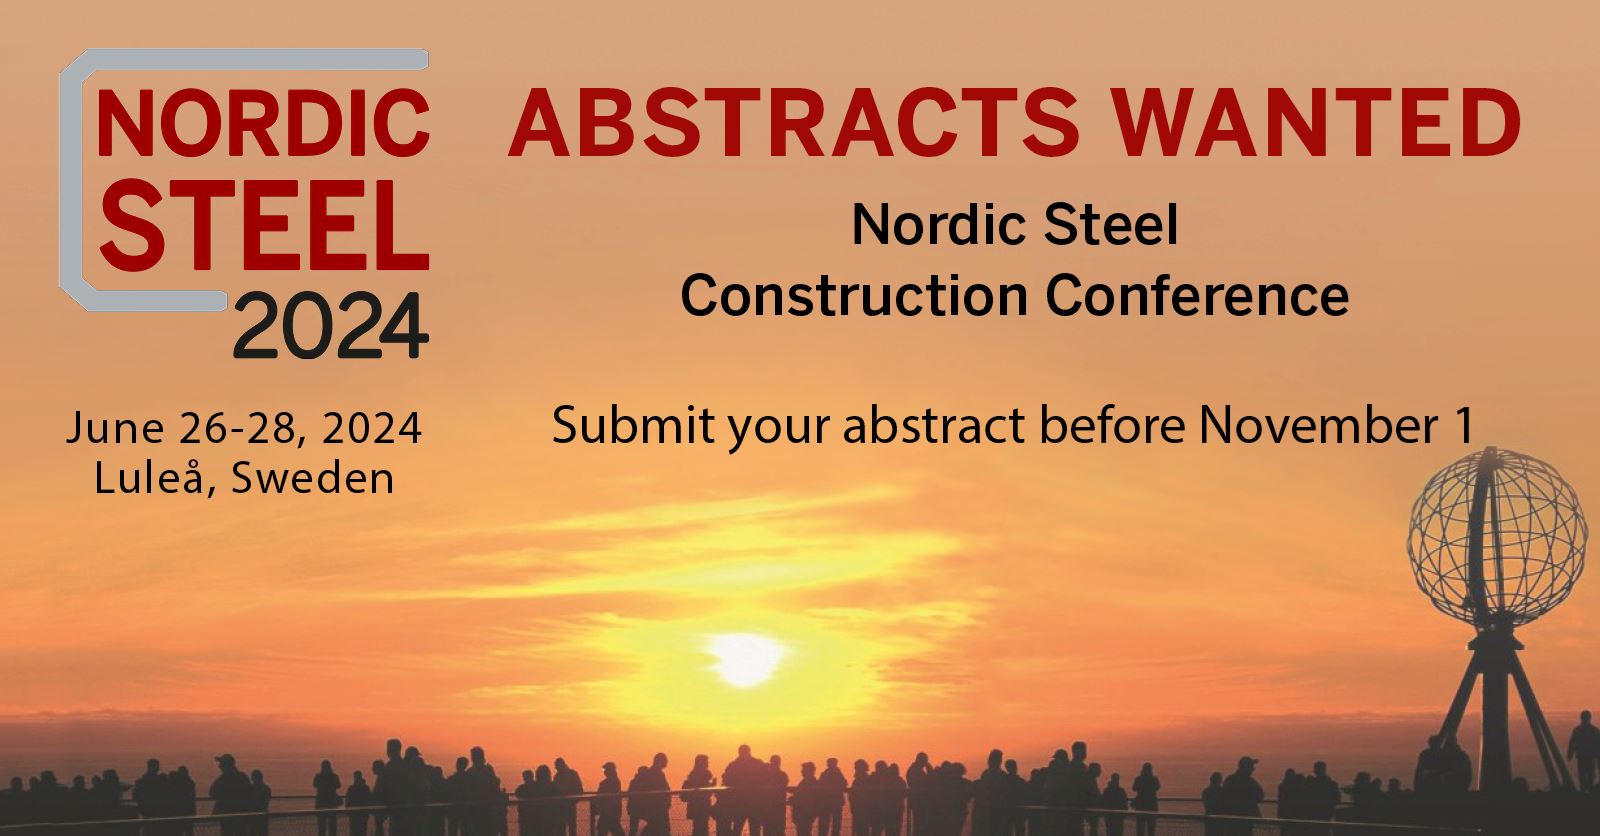 The 15th Nordic Steel Construction Conference will bring together the steel construction industry in Sweeden